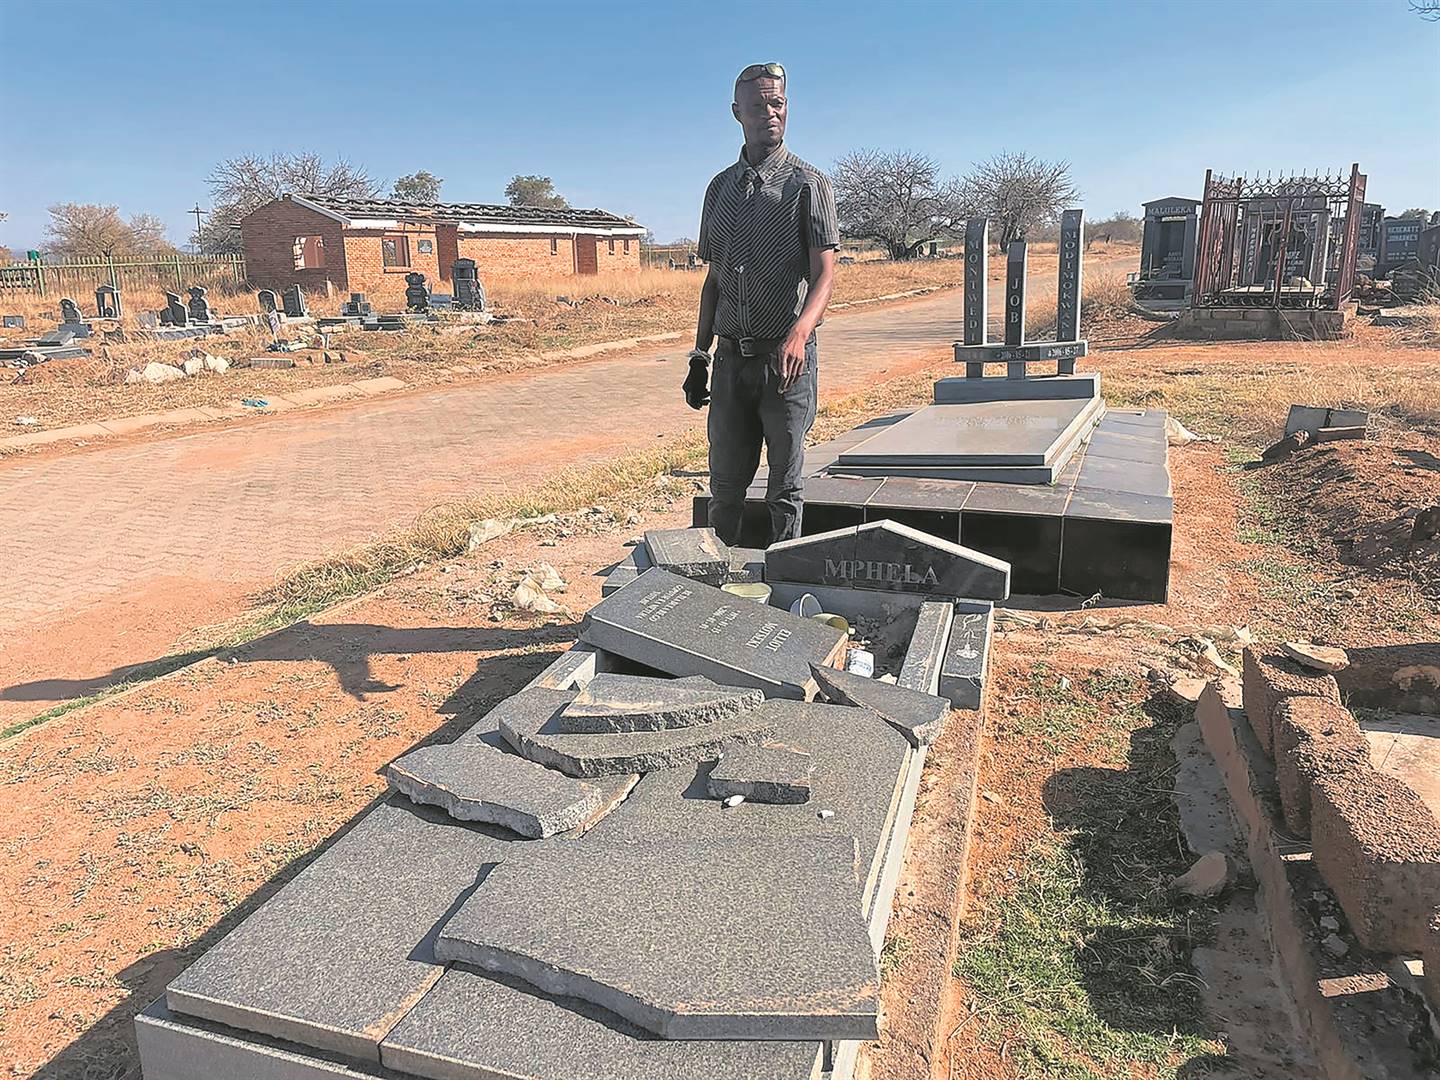 Community leader Jack Sekgojane said thugs don’t only vandalise tombstones at the Sofasonke Cemetery, but they also rob people of their belongings. Photo by                         Kgalalelo Tlhoaele